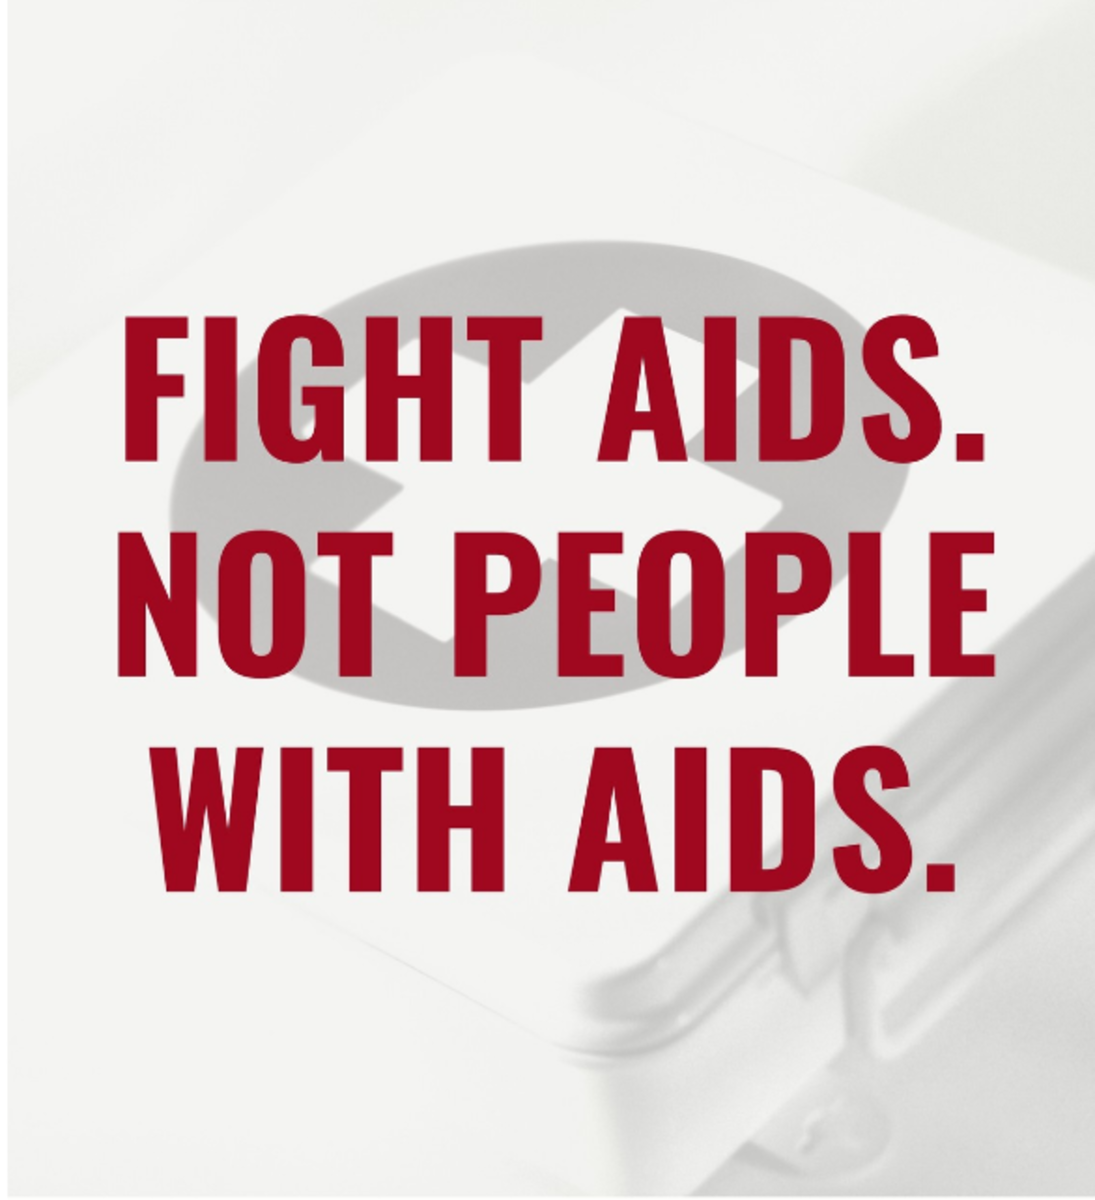 Fight AIDS. Not people with AIDS.